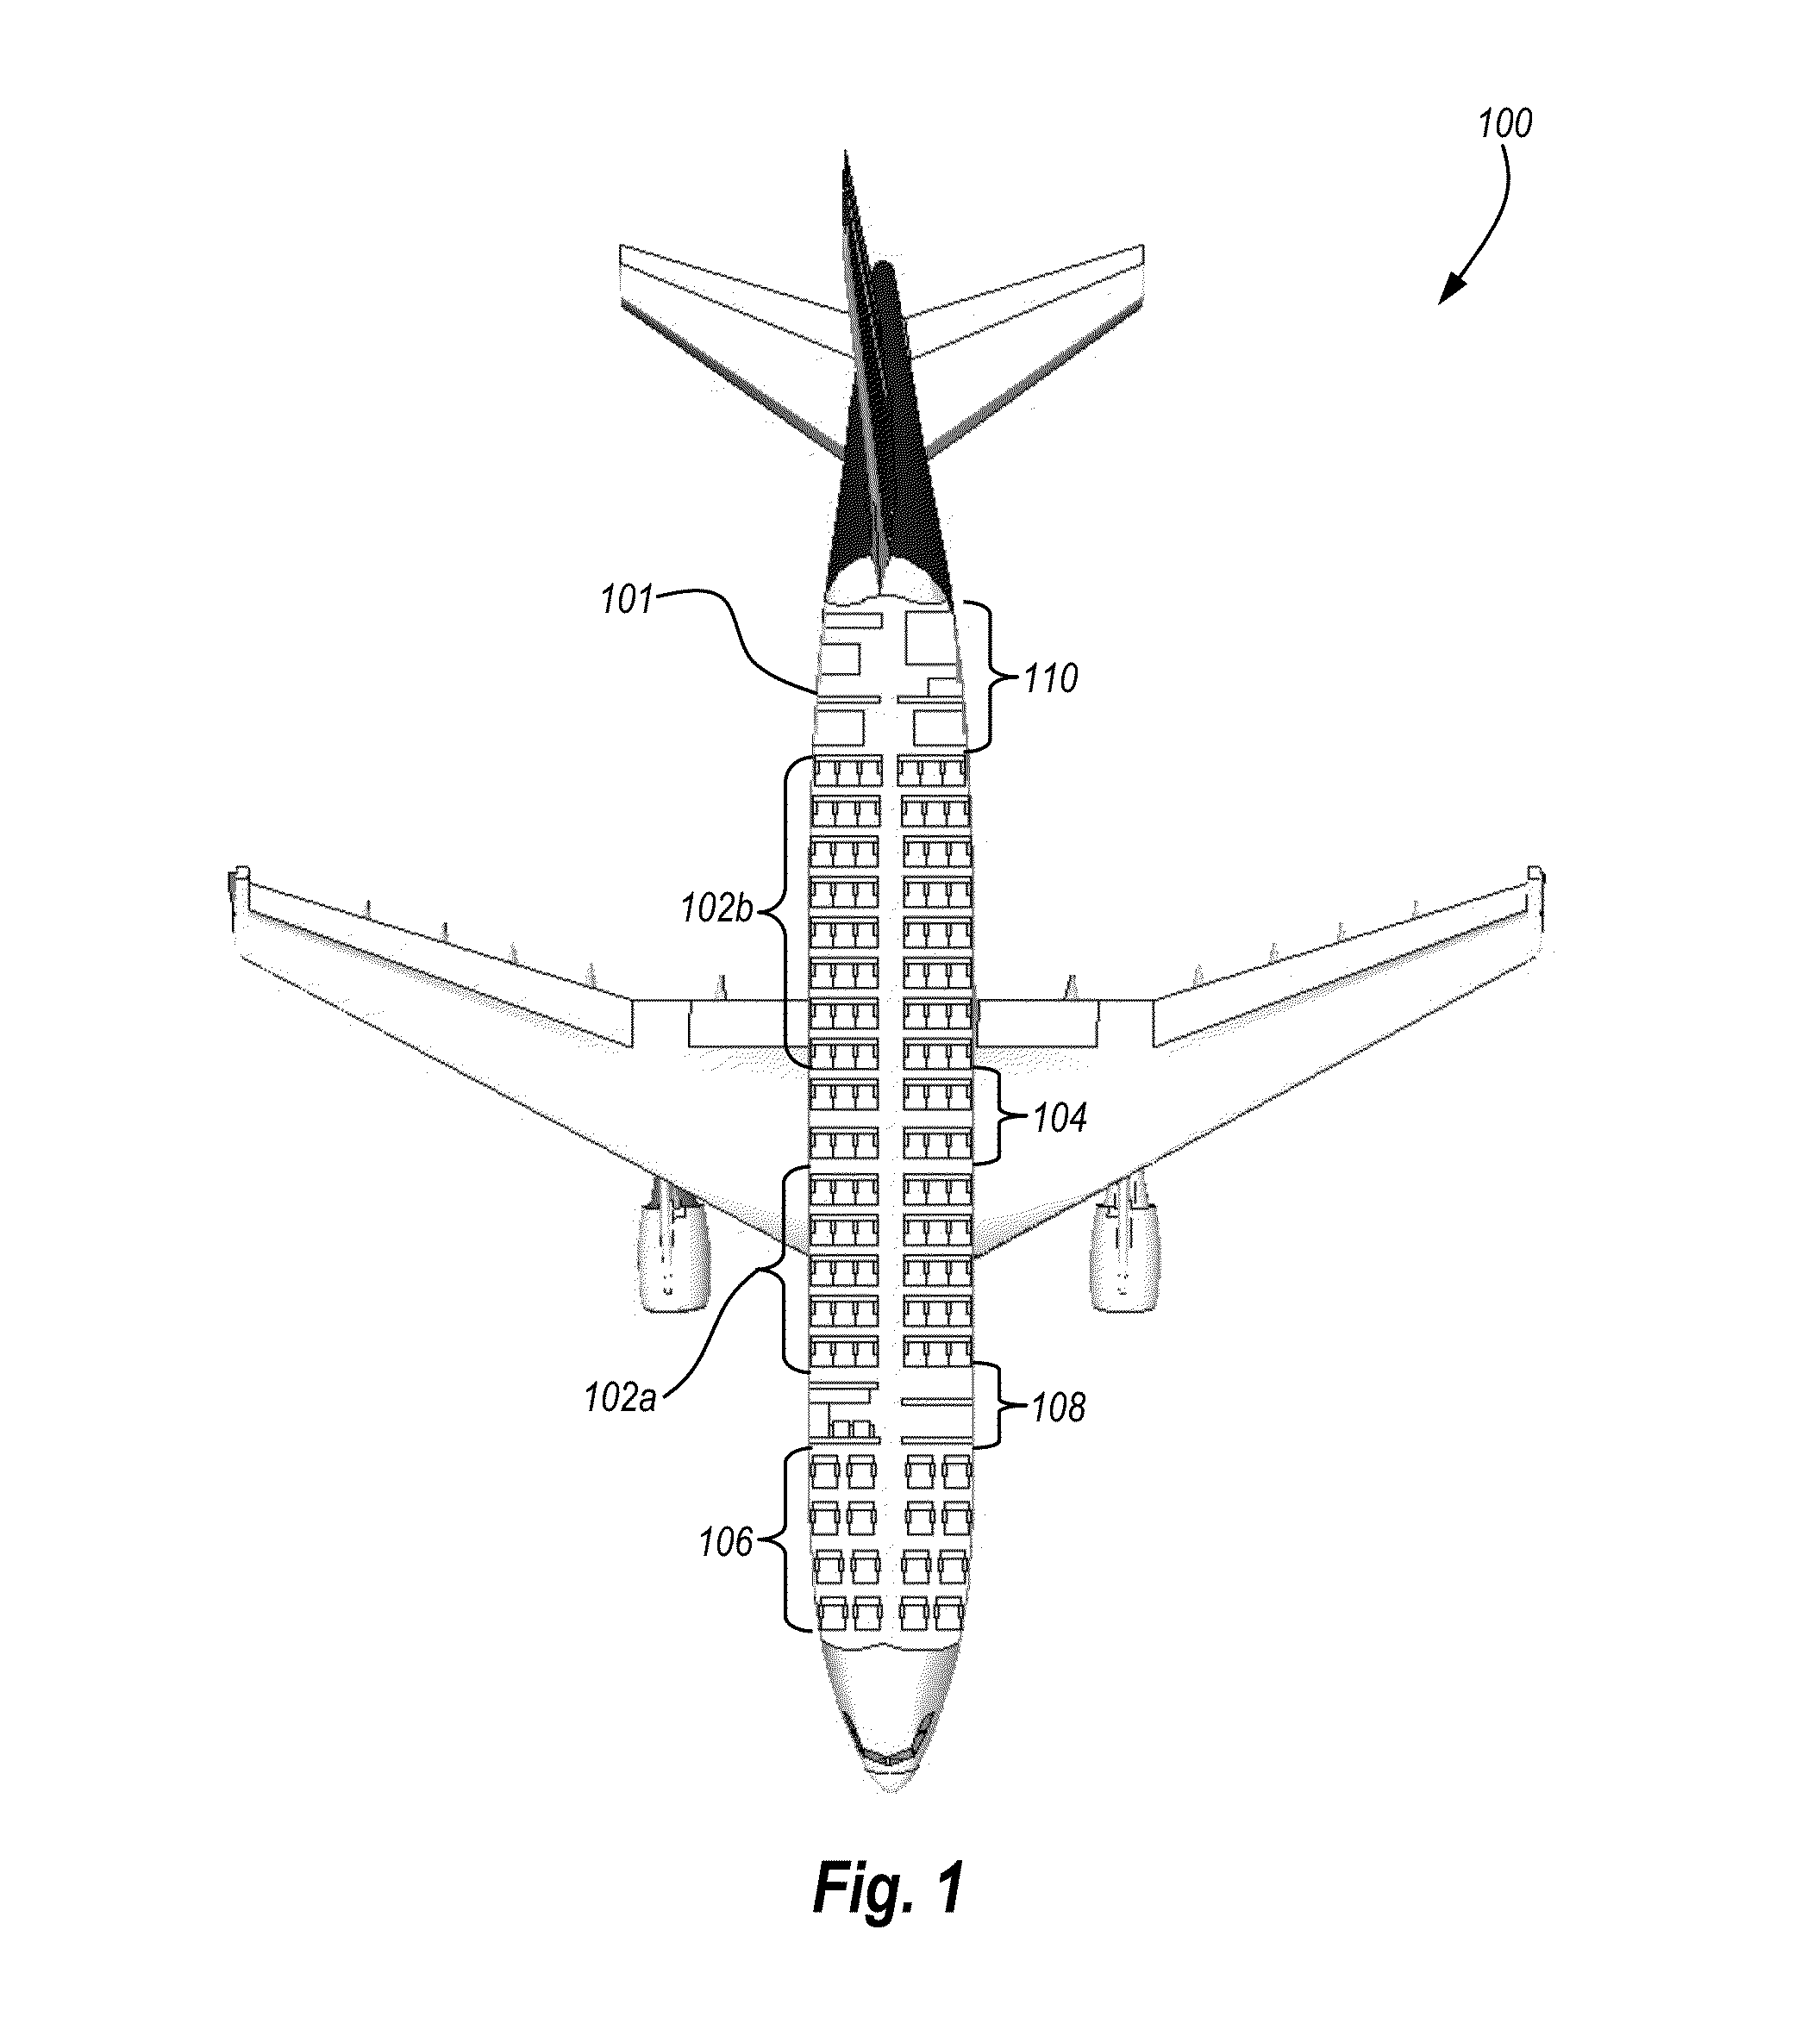 Audio-visual entertainment system and docking systems associated therewith